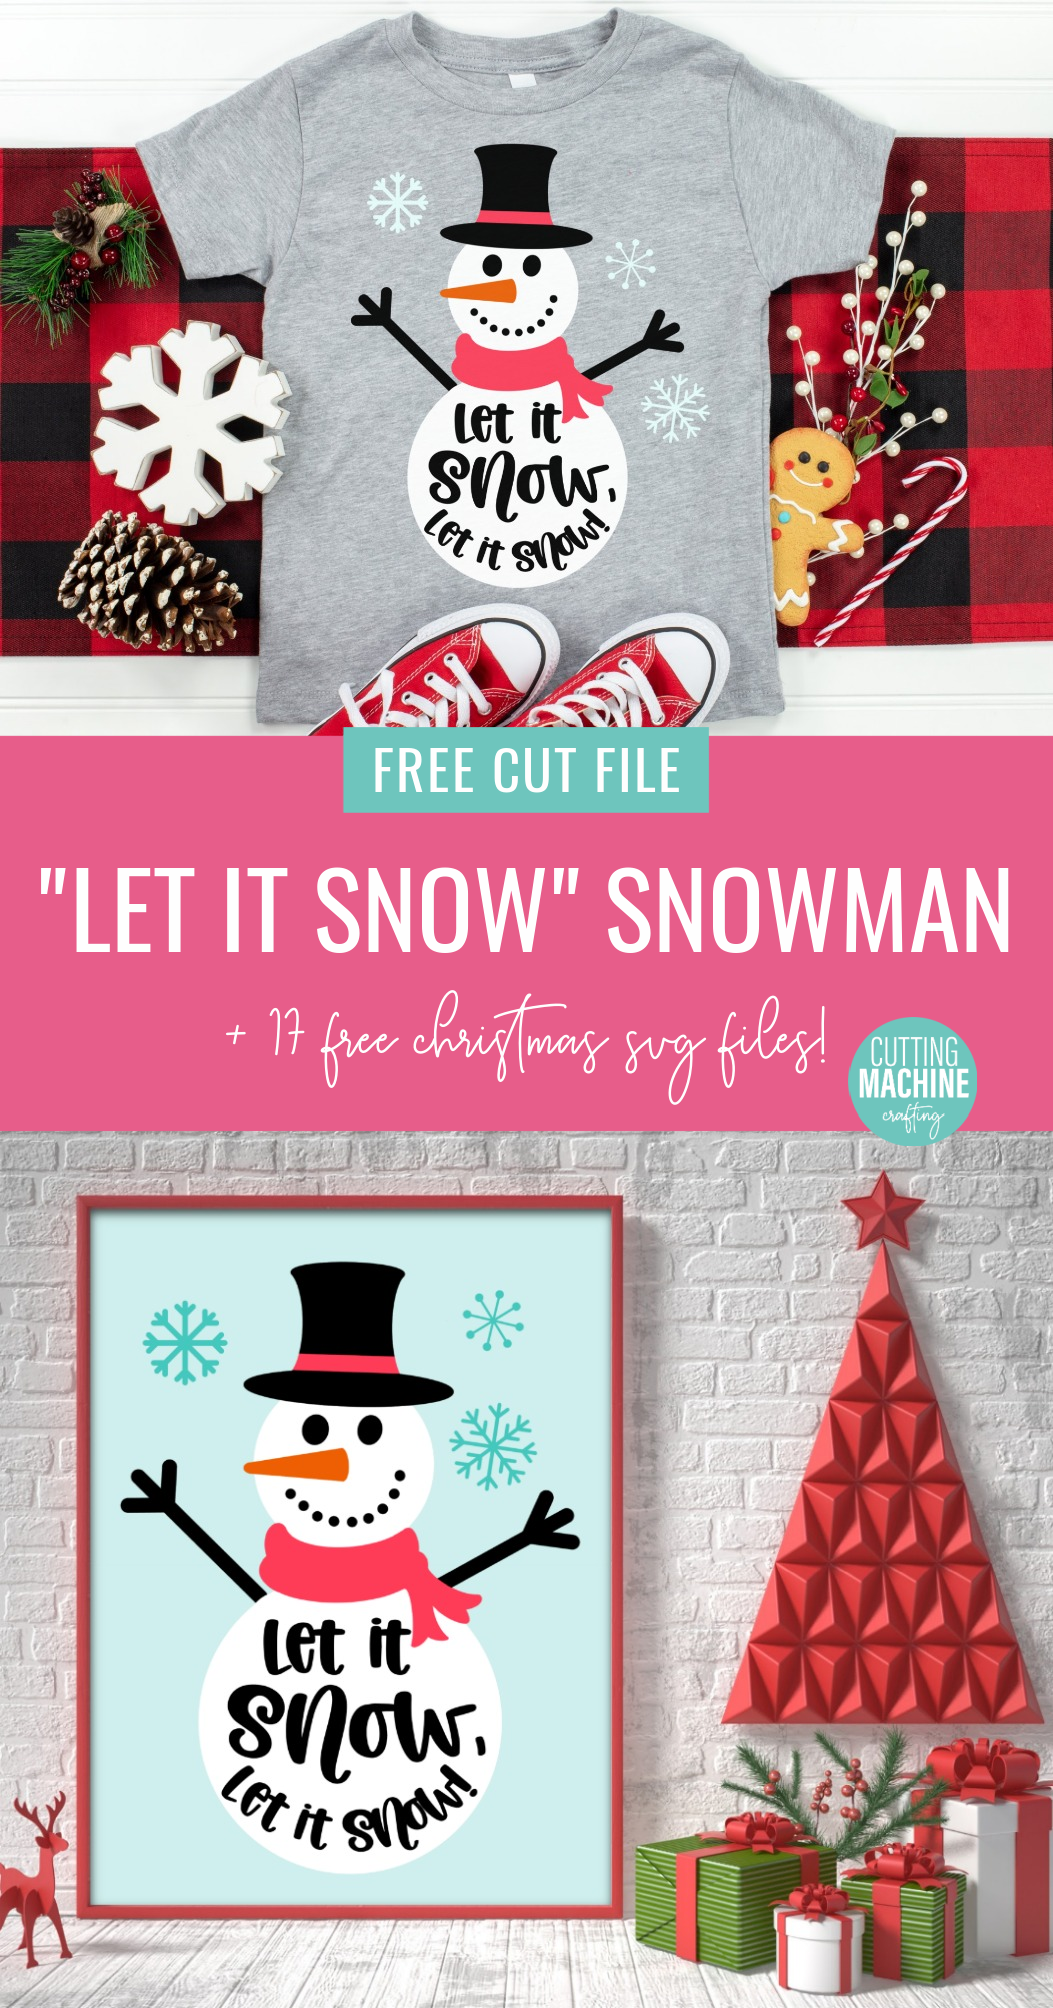 Let it snow with our free adorable snowman SVG File! We're sharing it along with 17 Free Christmas Cut Files from our creative friends! Perfect for handmade holiday gifts using your Cricut Maker, Cricut Explore, Cricut Joy or SIlhouette Cameo! #ChristmasCrafting #Handmadegifts #CricutCrafts #CricutCreated CricutMade #CricutChristmas #ChristmasCutFiles #ChristmasSVG #NaughtyorNice #DIY #Craft